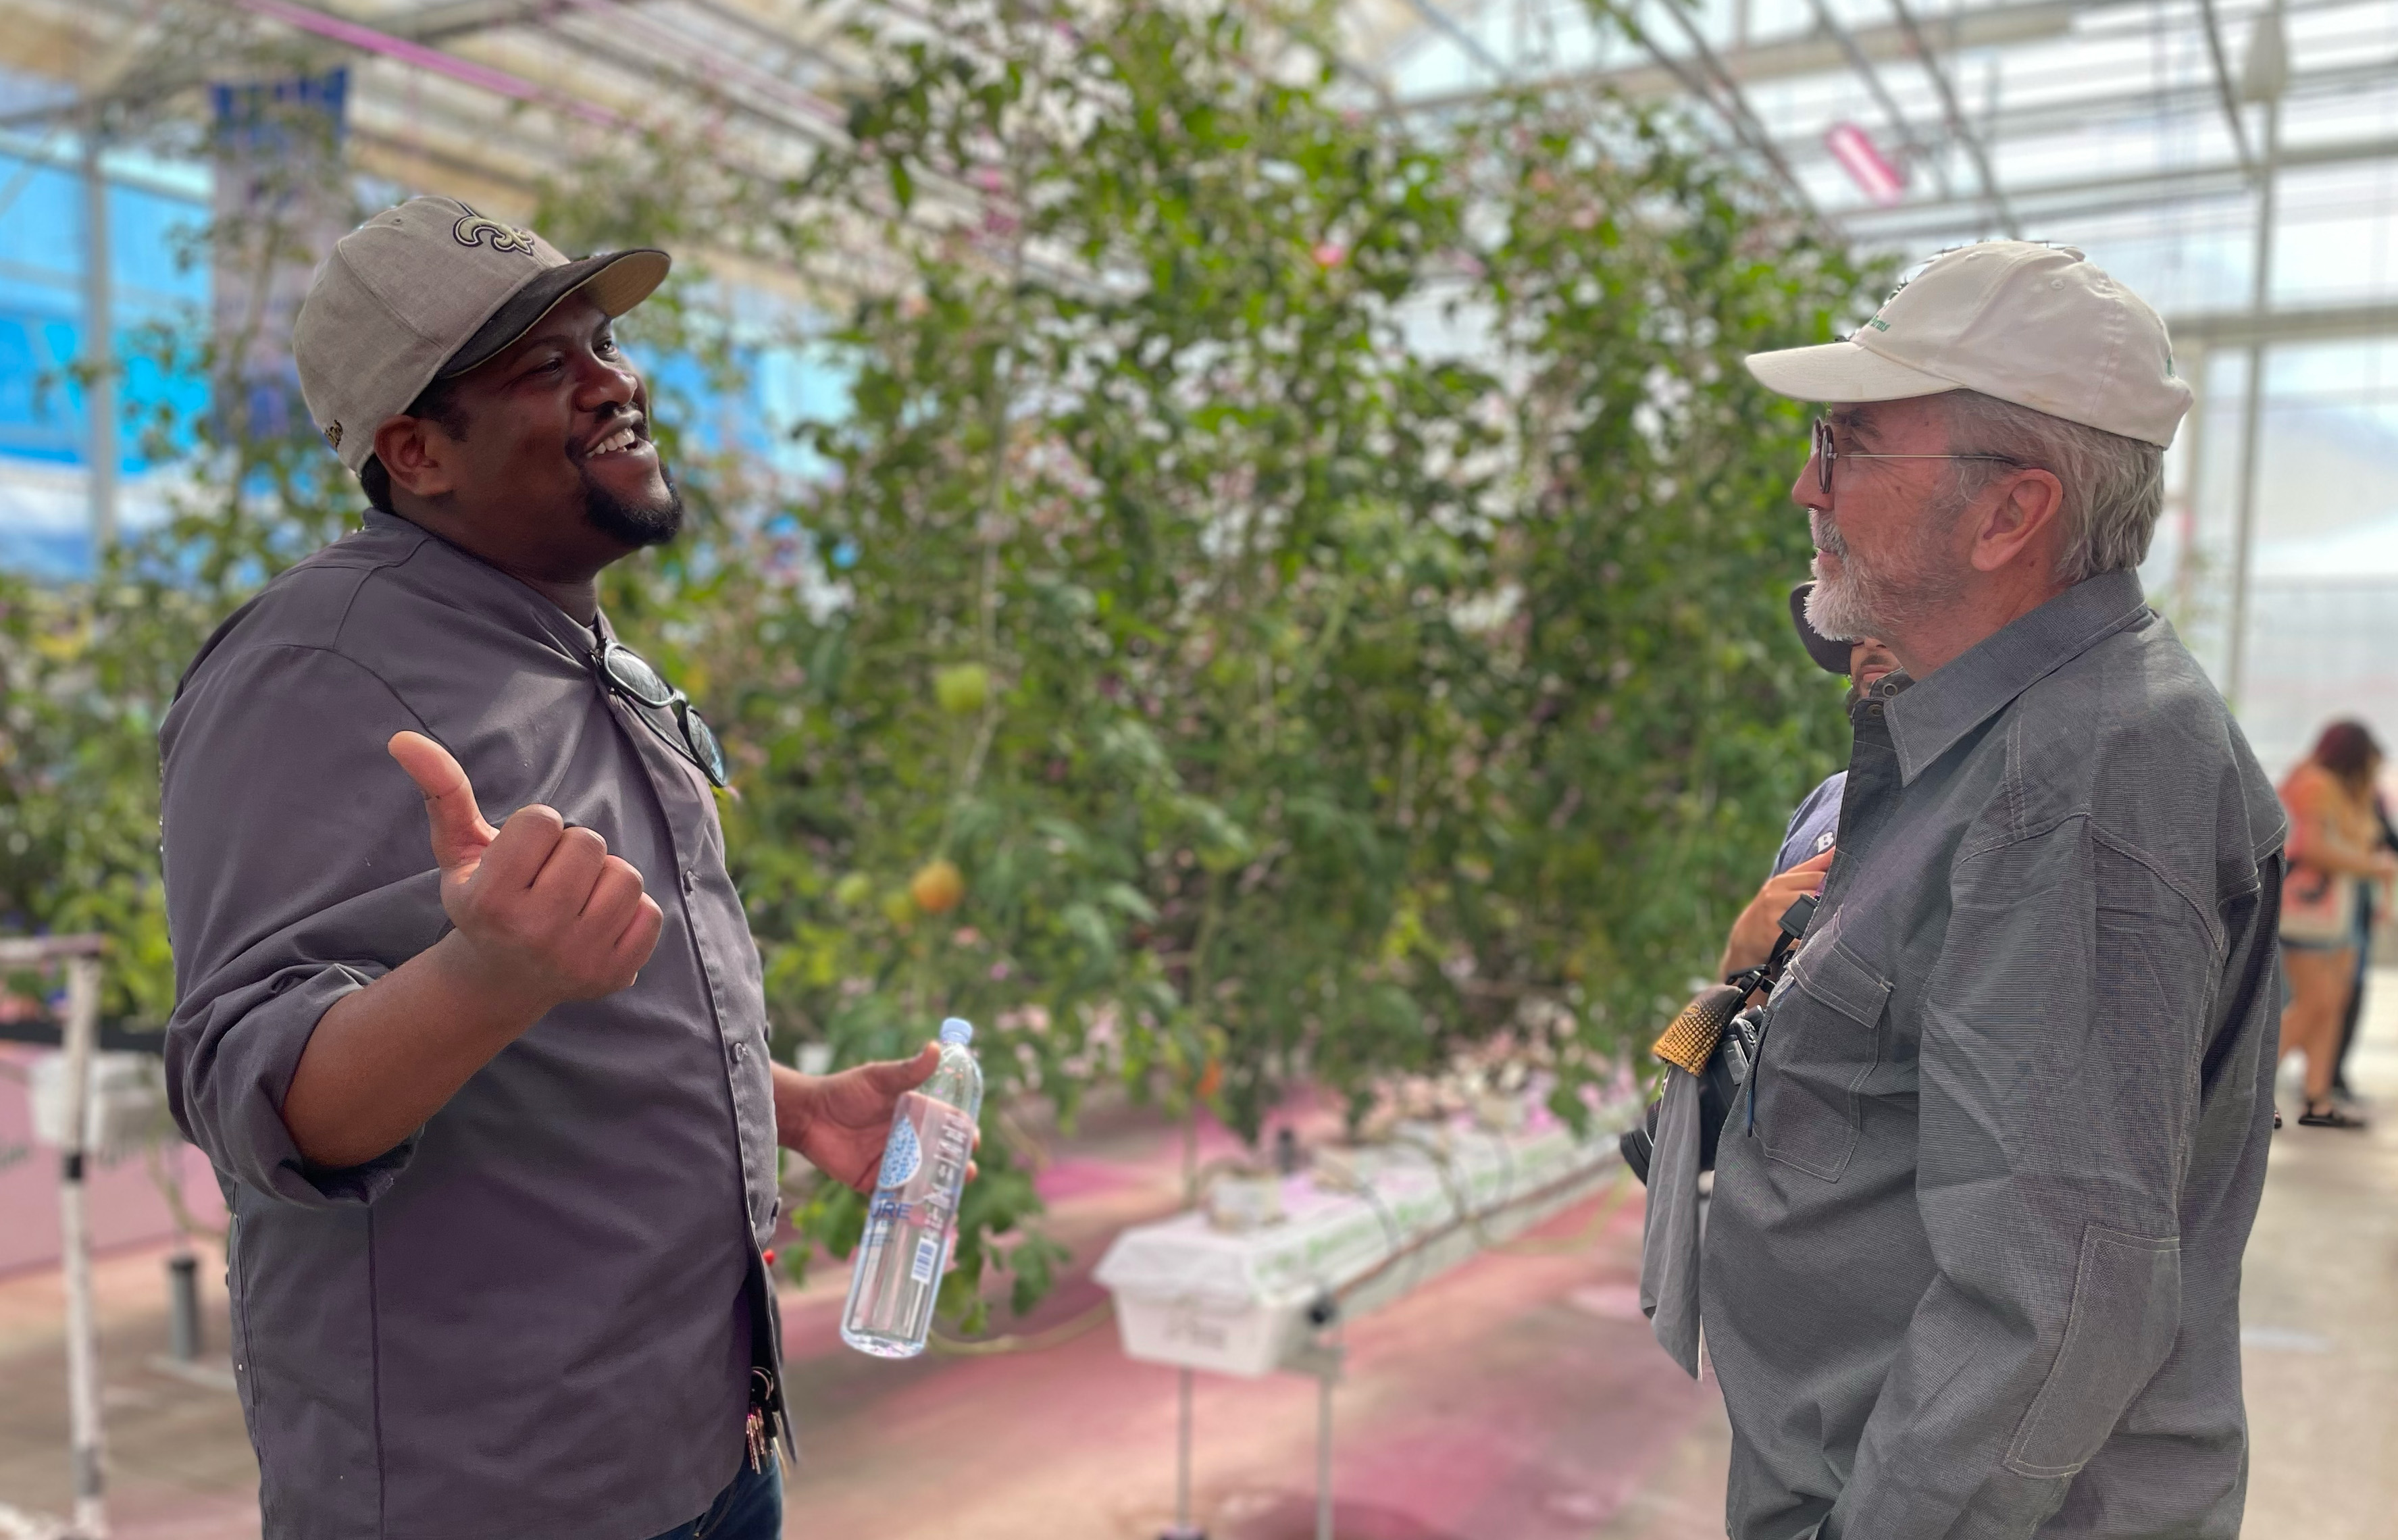 Two men talk in a greenhouse, where numerous vegetable-bearing plants grow around them.